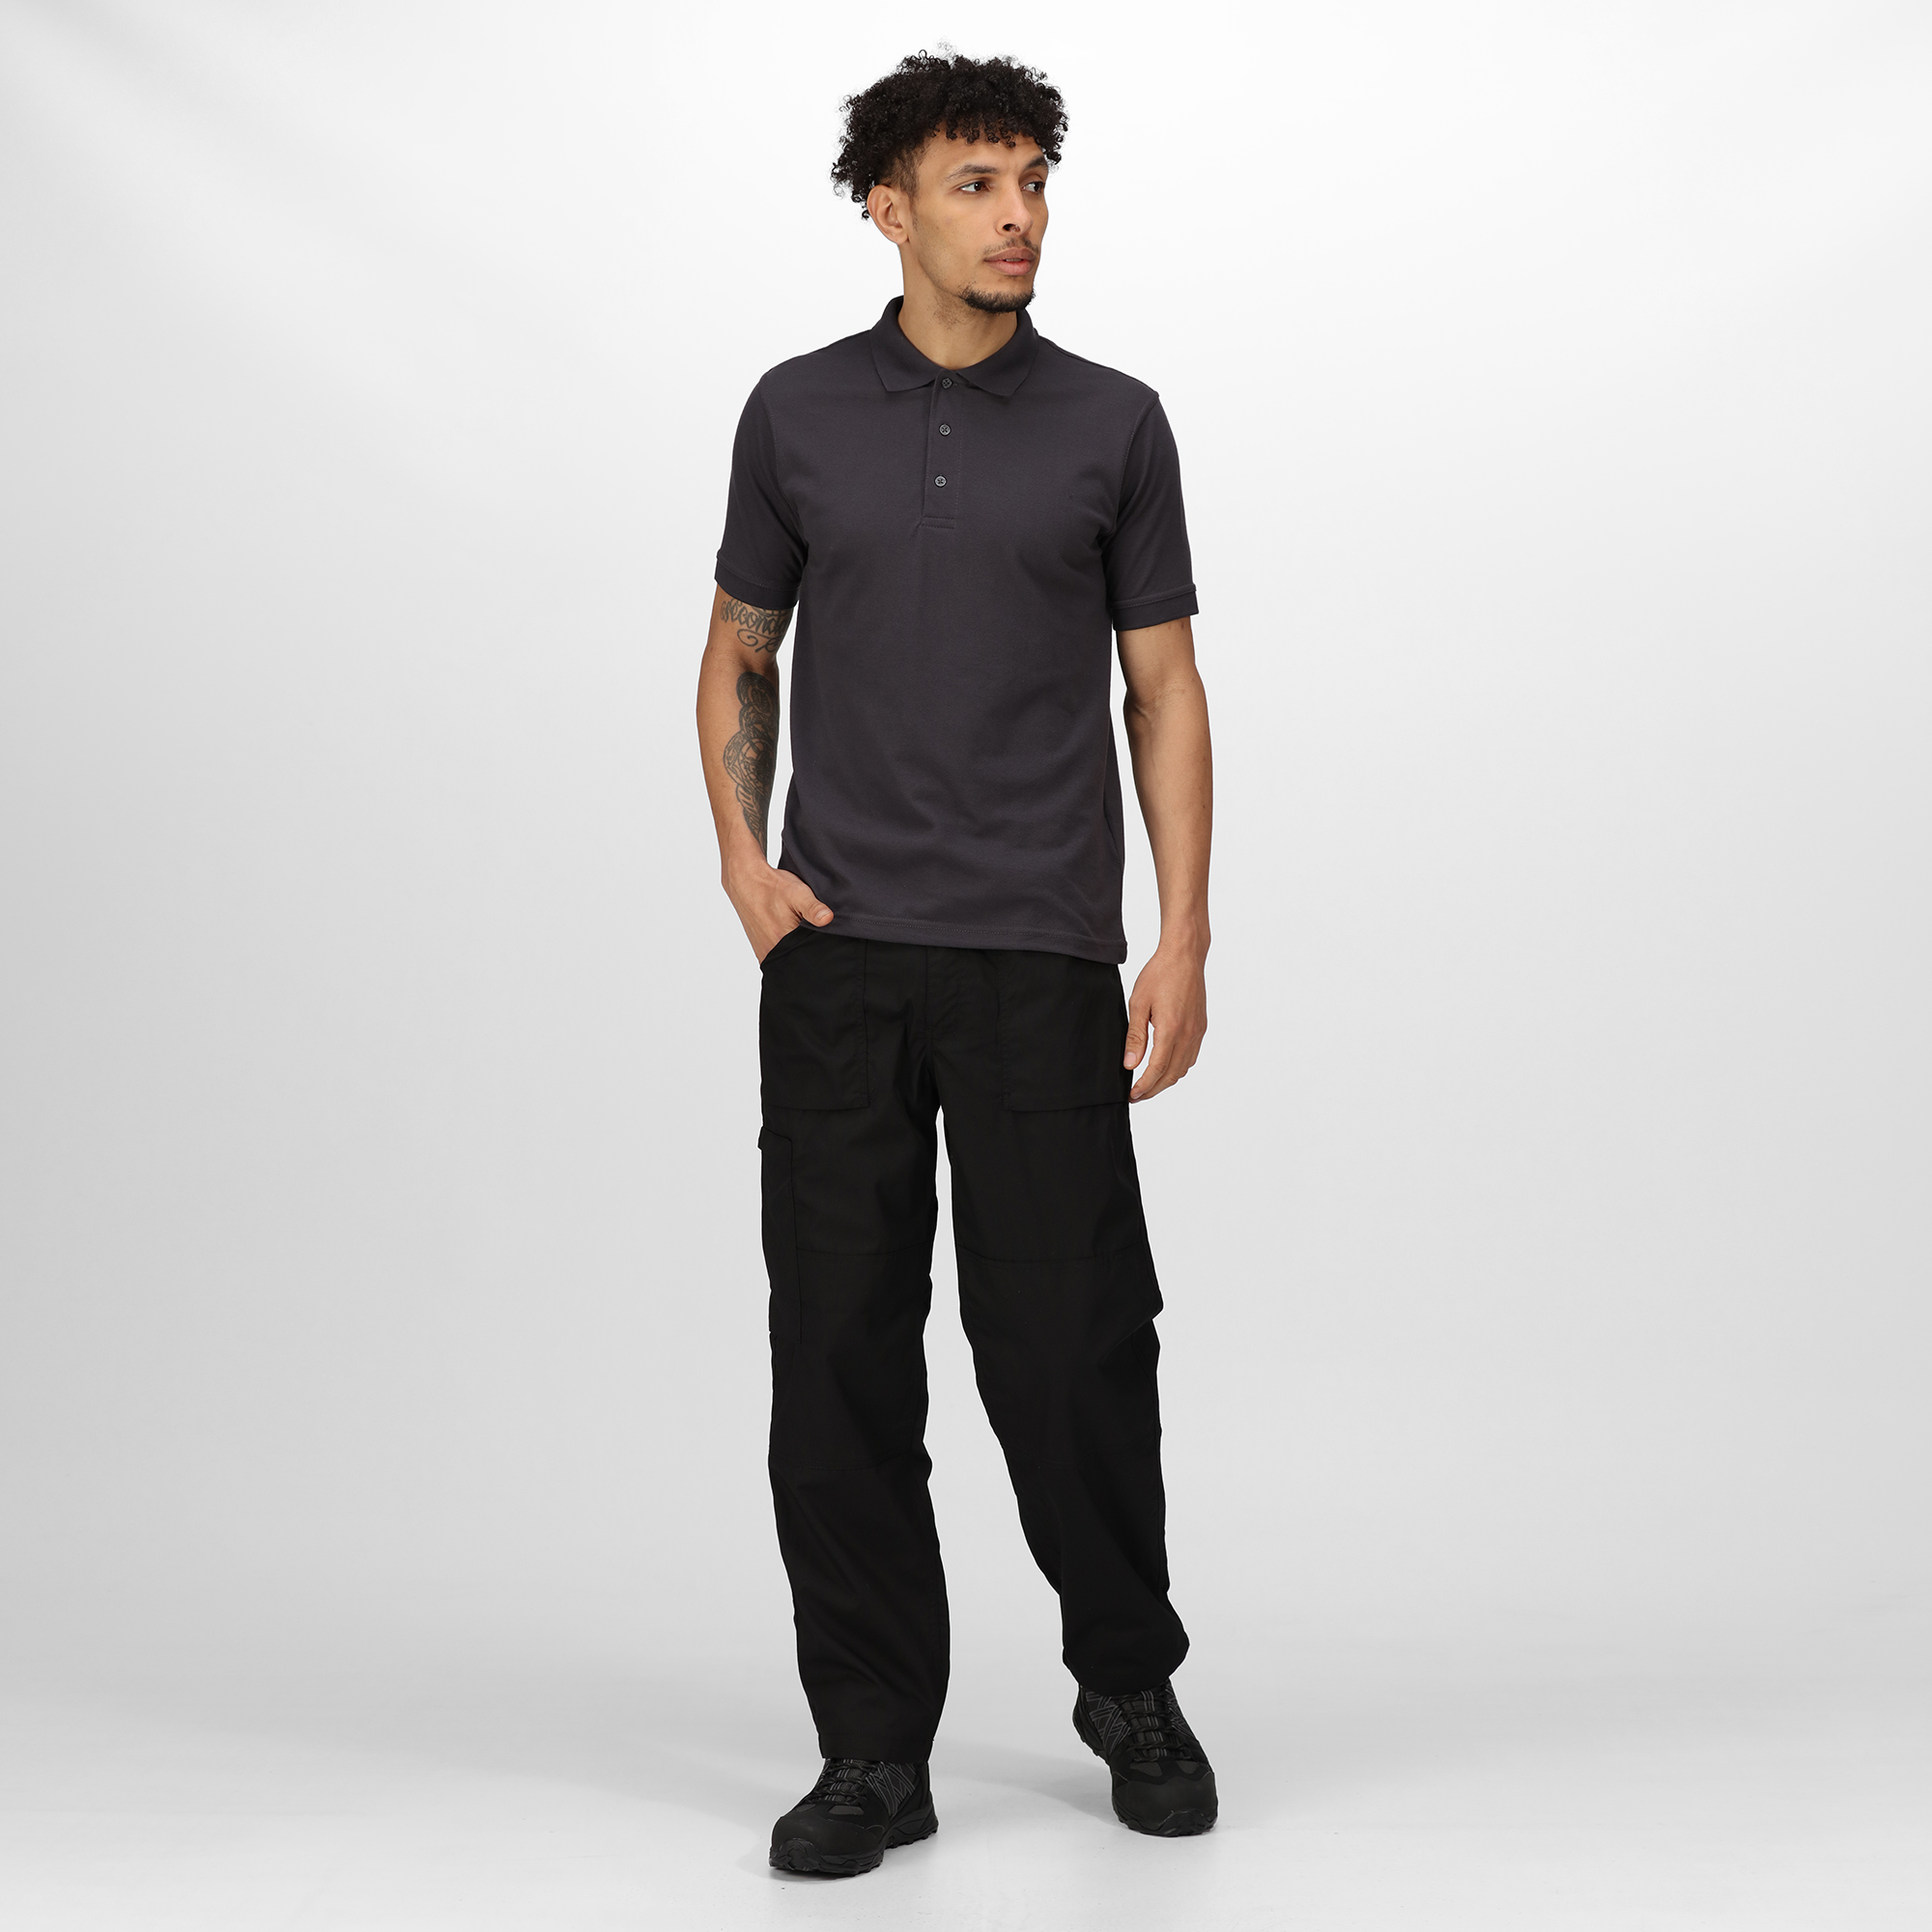 LINED ACTION TROUSERS - Regatta Professional